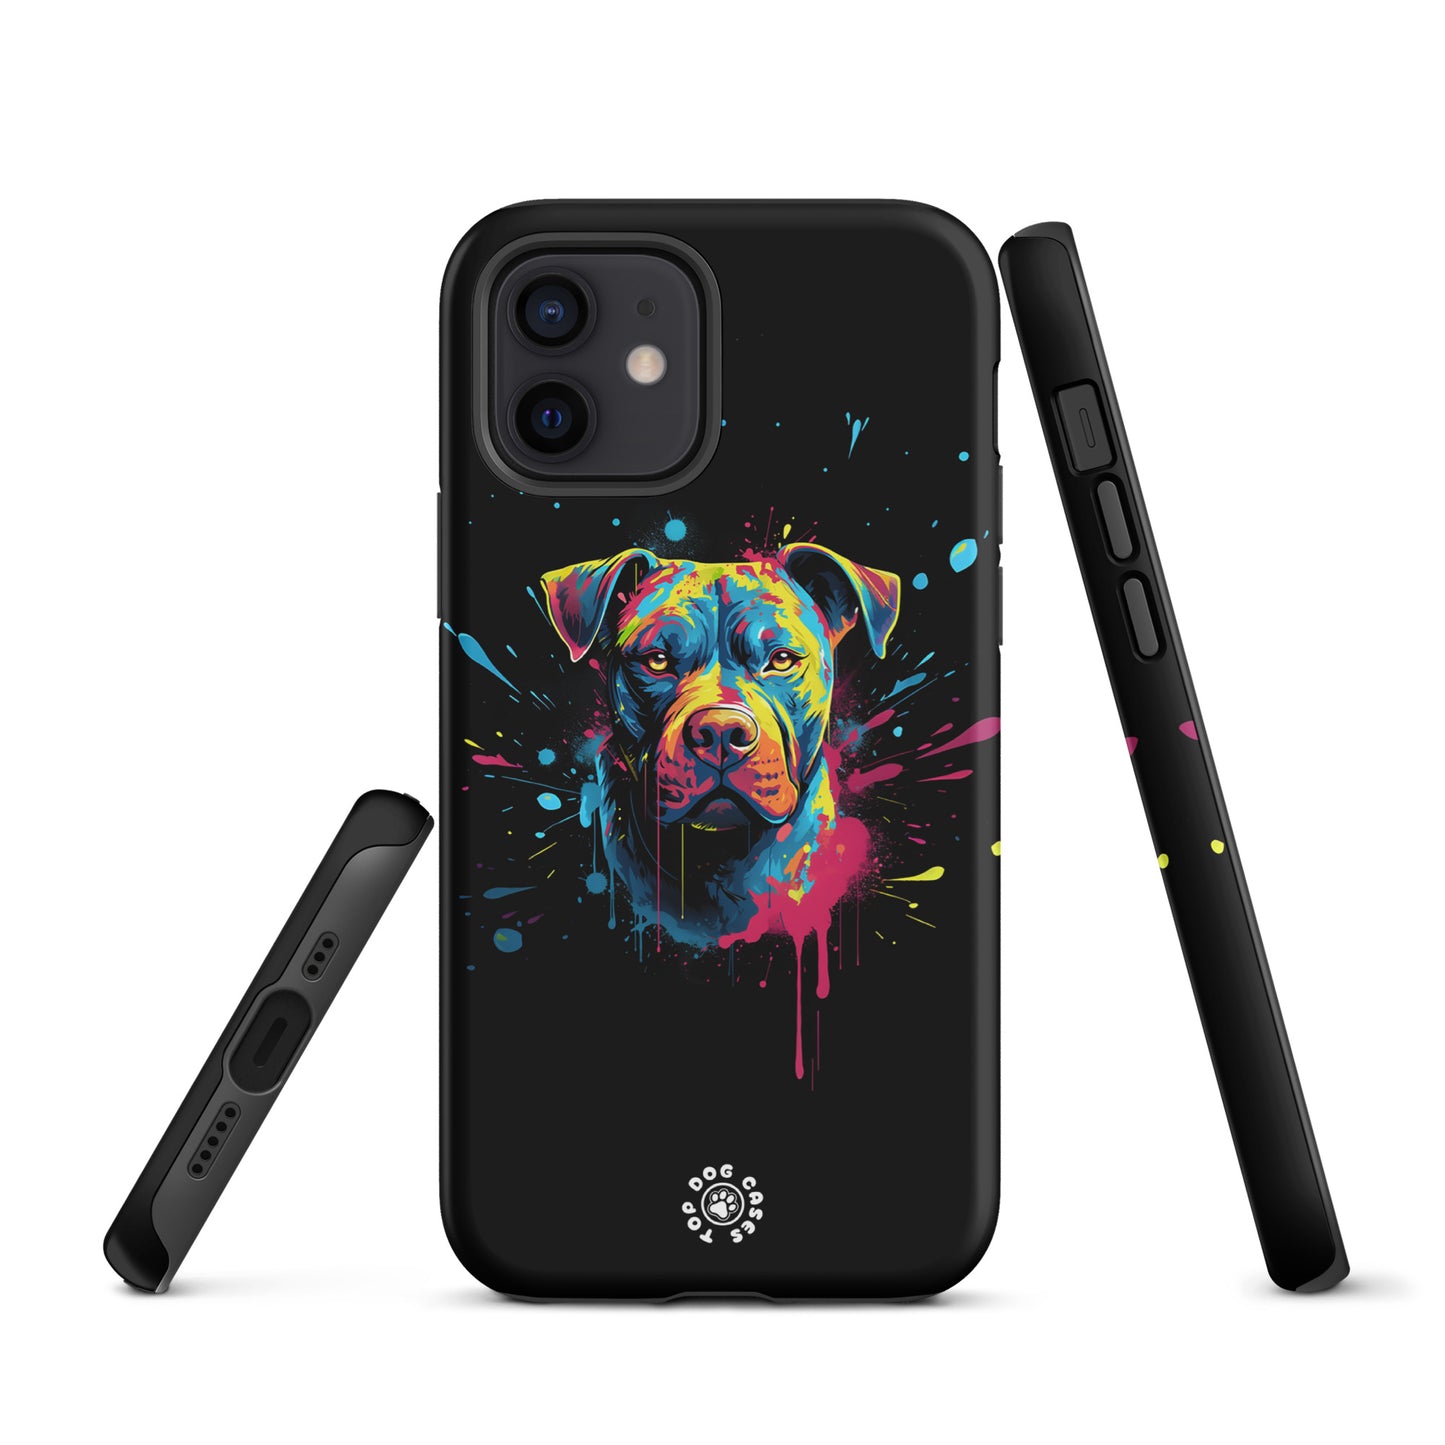 Pit Bull - Colorful Phone Case - iPhone Case - Top Dog Cases - #ColorfulPhoneCases, #iPhone, #iPhone11, #iphone11case, #iPhone12, #iPhone12case, #iPhone13, #iPhone13case, #iPhone13DogCase, #iPhone13Mini, #iPhone13Pro, #iPhone13ProMax, #iPhone14, #iPhone14case, #iPhone14DogCase, #iPhone14Plus, #iPhone14Pluscase, #iPhone14Pro, #iPhone14ProMax, #iPhone14ProMaxCase, #iPhone15, #iPhone15case, #iPhonecase, #iphonedogcase, #Pit Bull